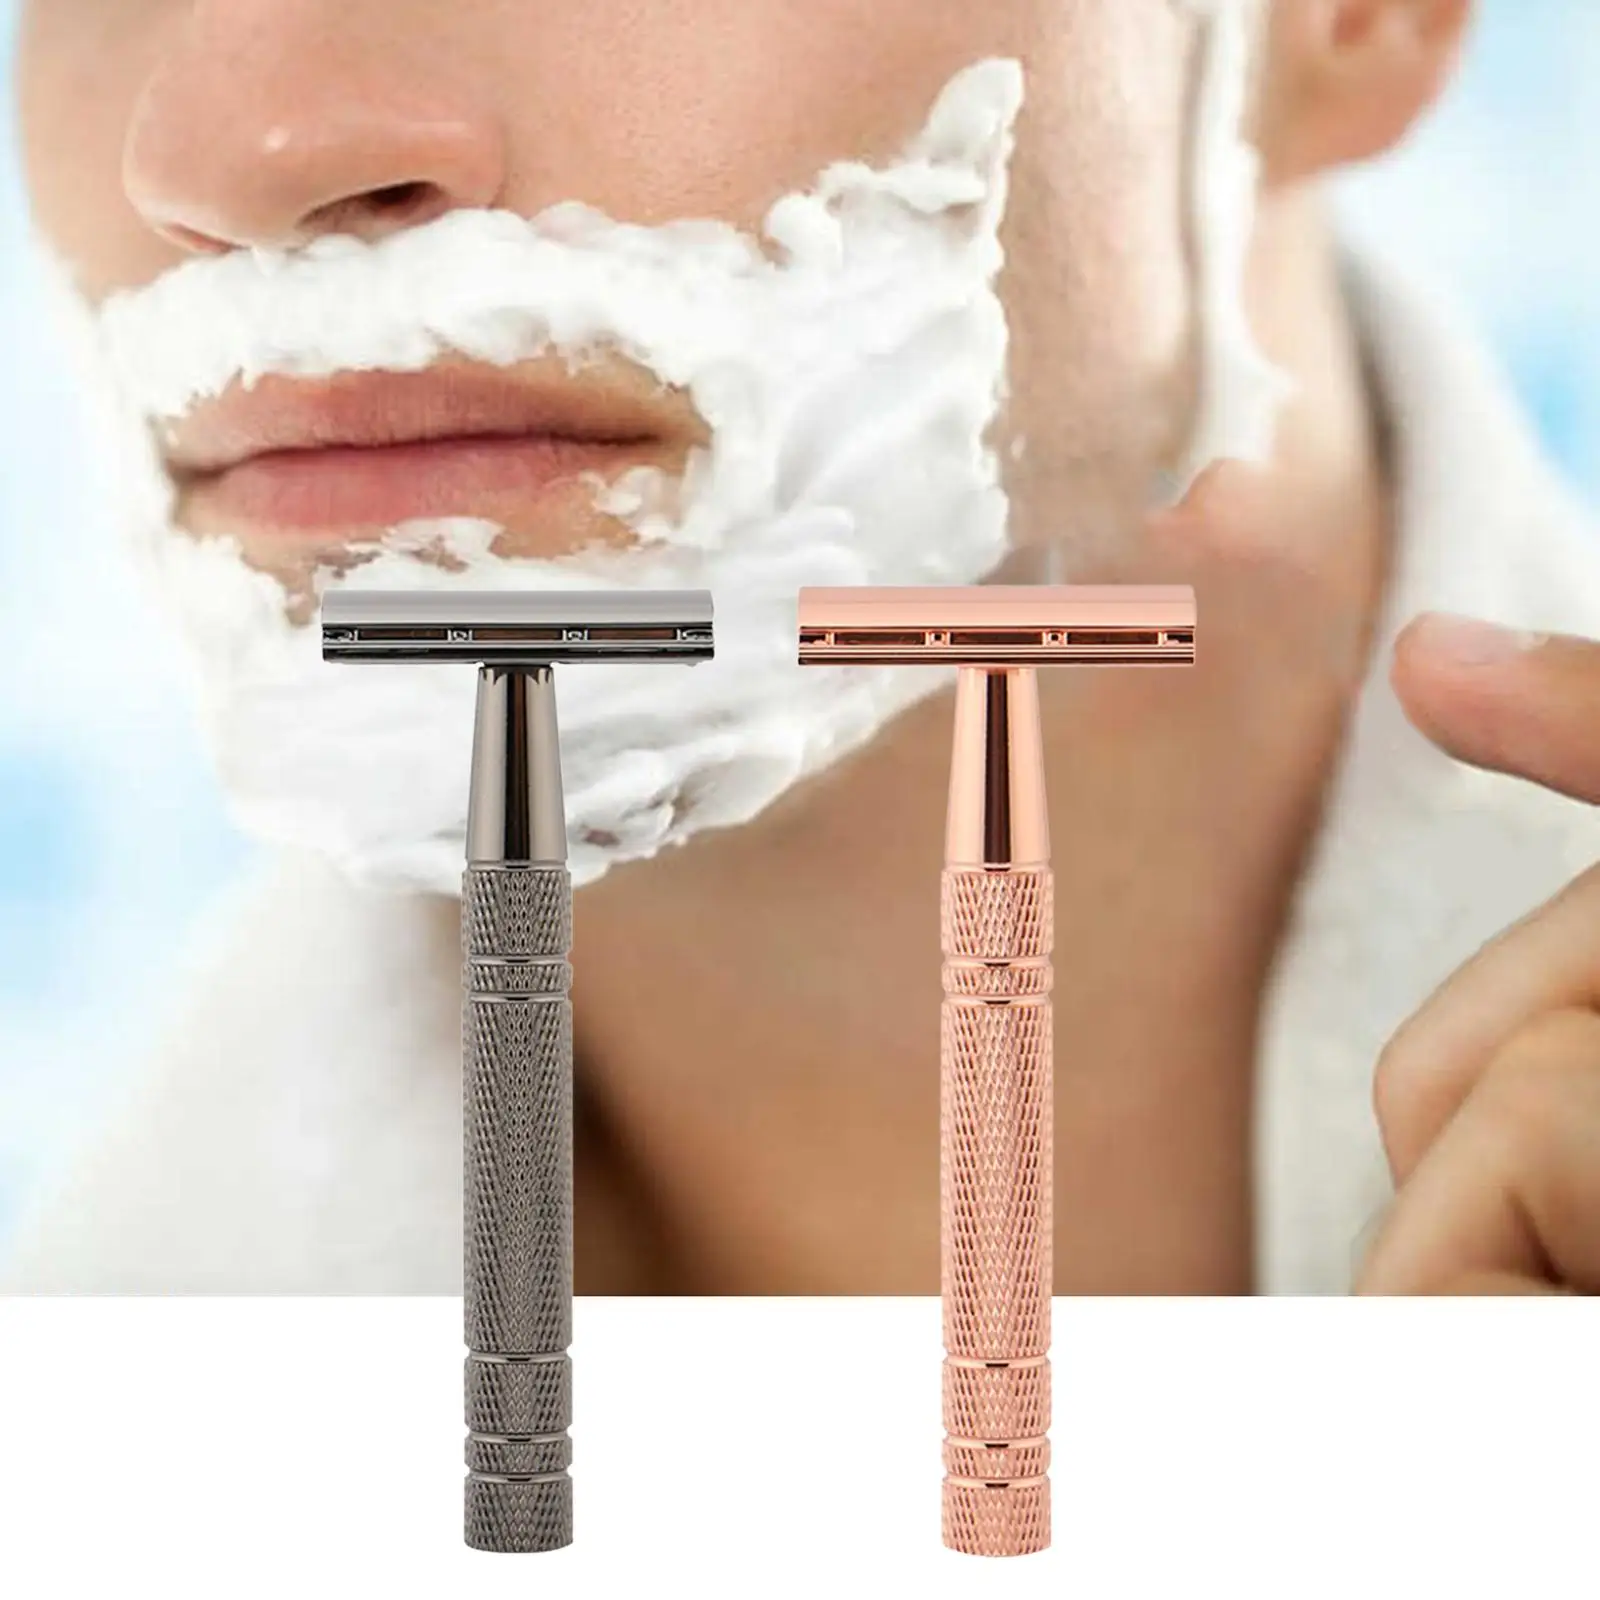 Double Edge Safety Razor Shaving Long Handle Face Hair Removal for Men with 5Pcs Razor Blades